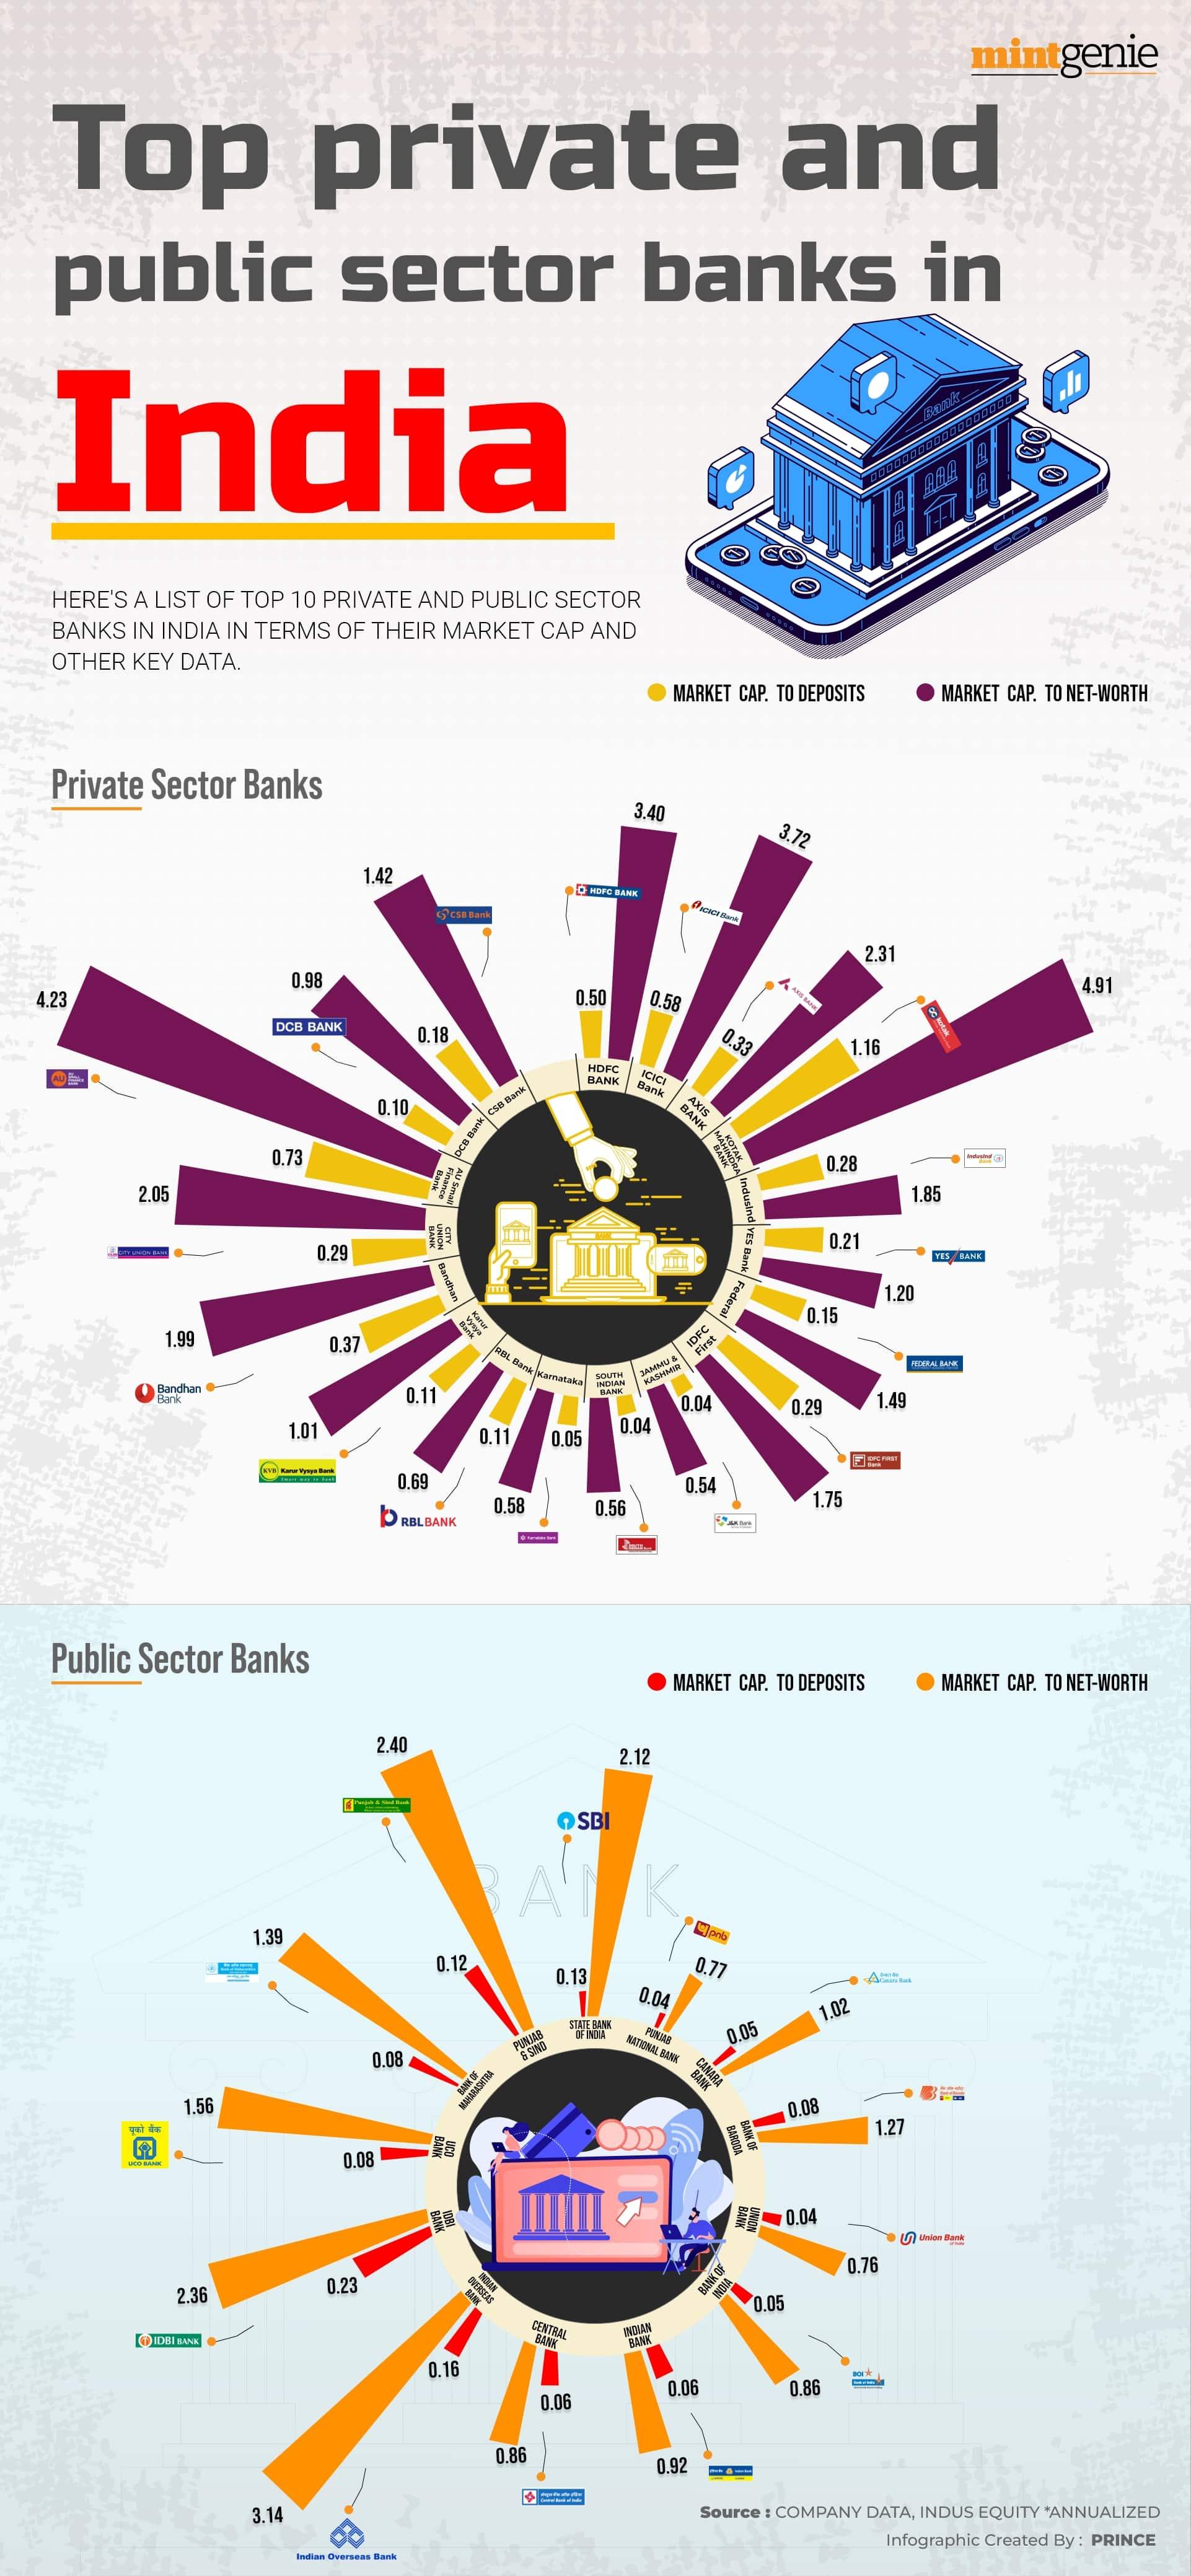 Top private and public sector banks in India